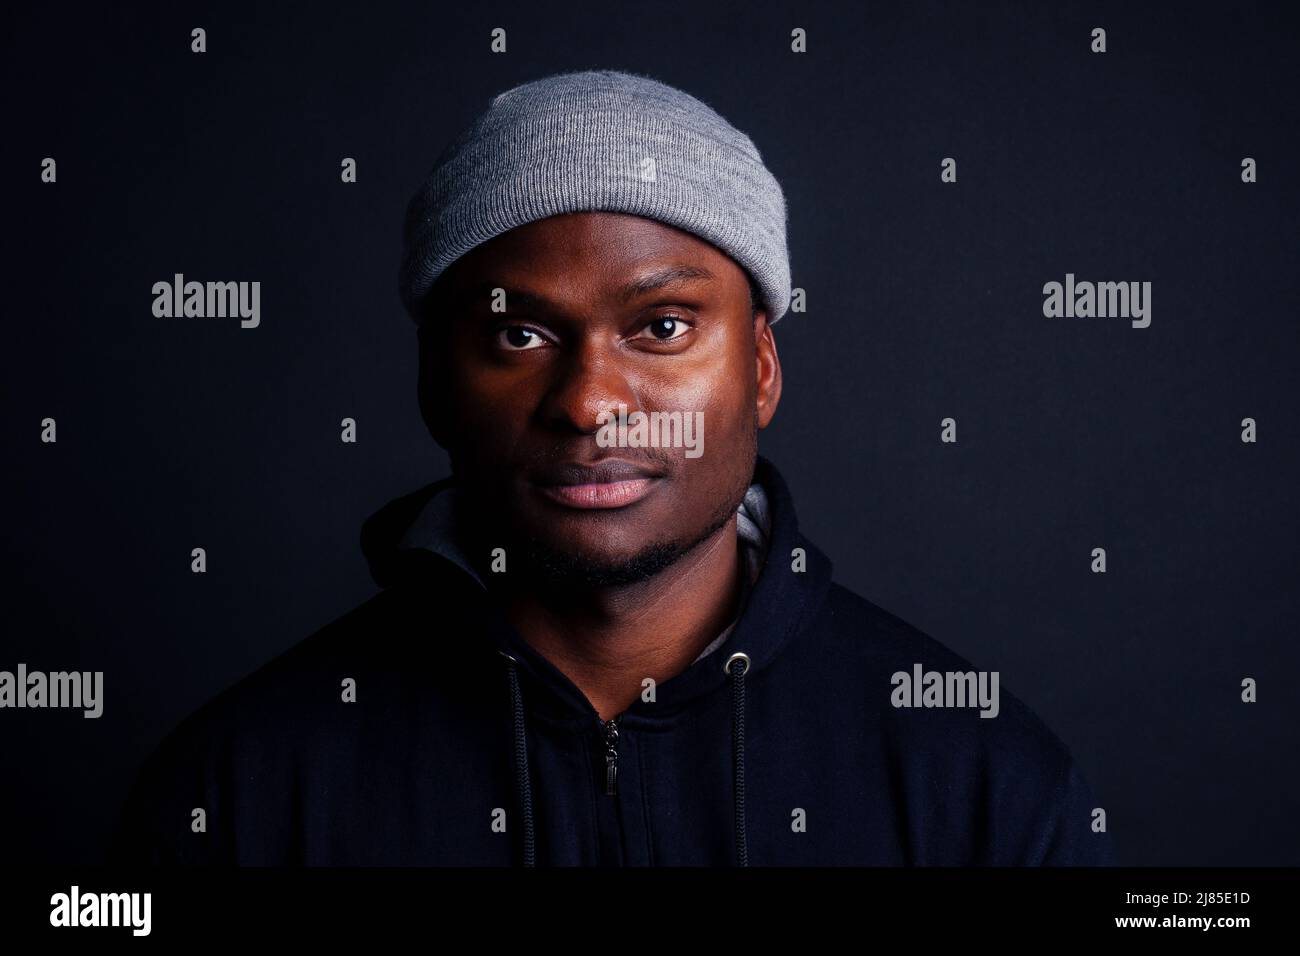 handsome afro-america male wearing gray hat and black hoody with hood serious and strong look at the camera studio shot background Stock Photo